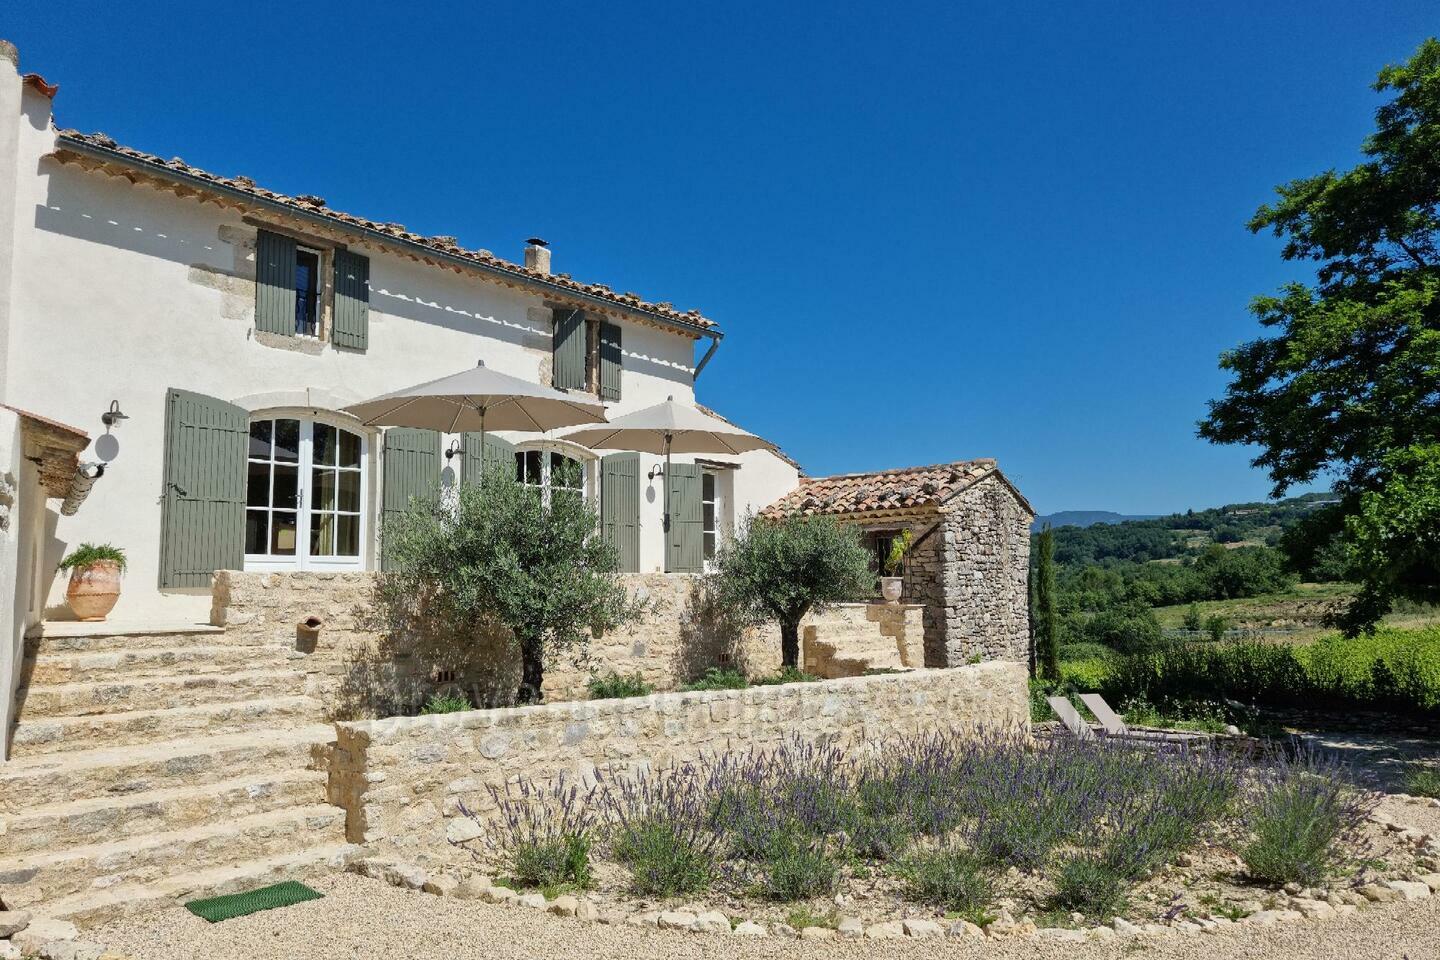 Holiday Rental with Private Pool in the Luberon -1 - Mas Cerisiers: Villa: Exterior